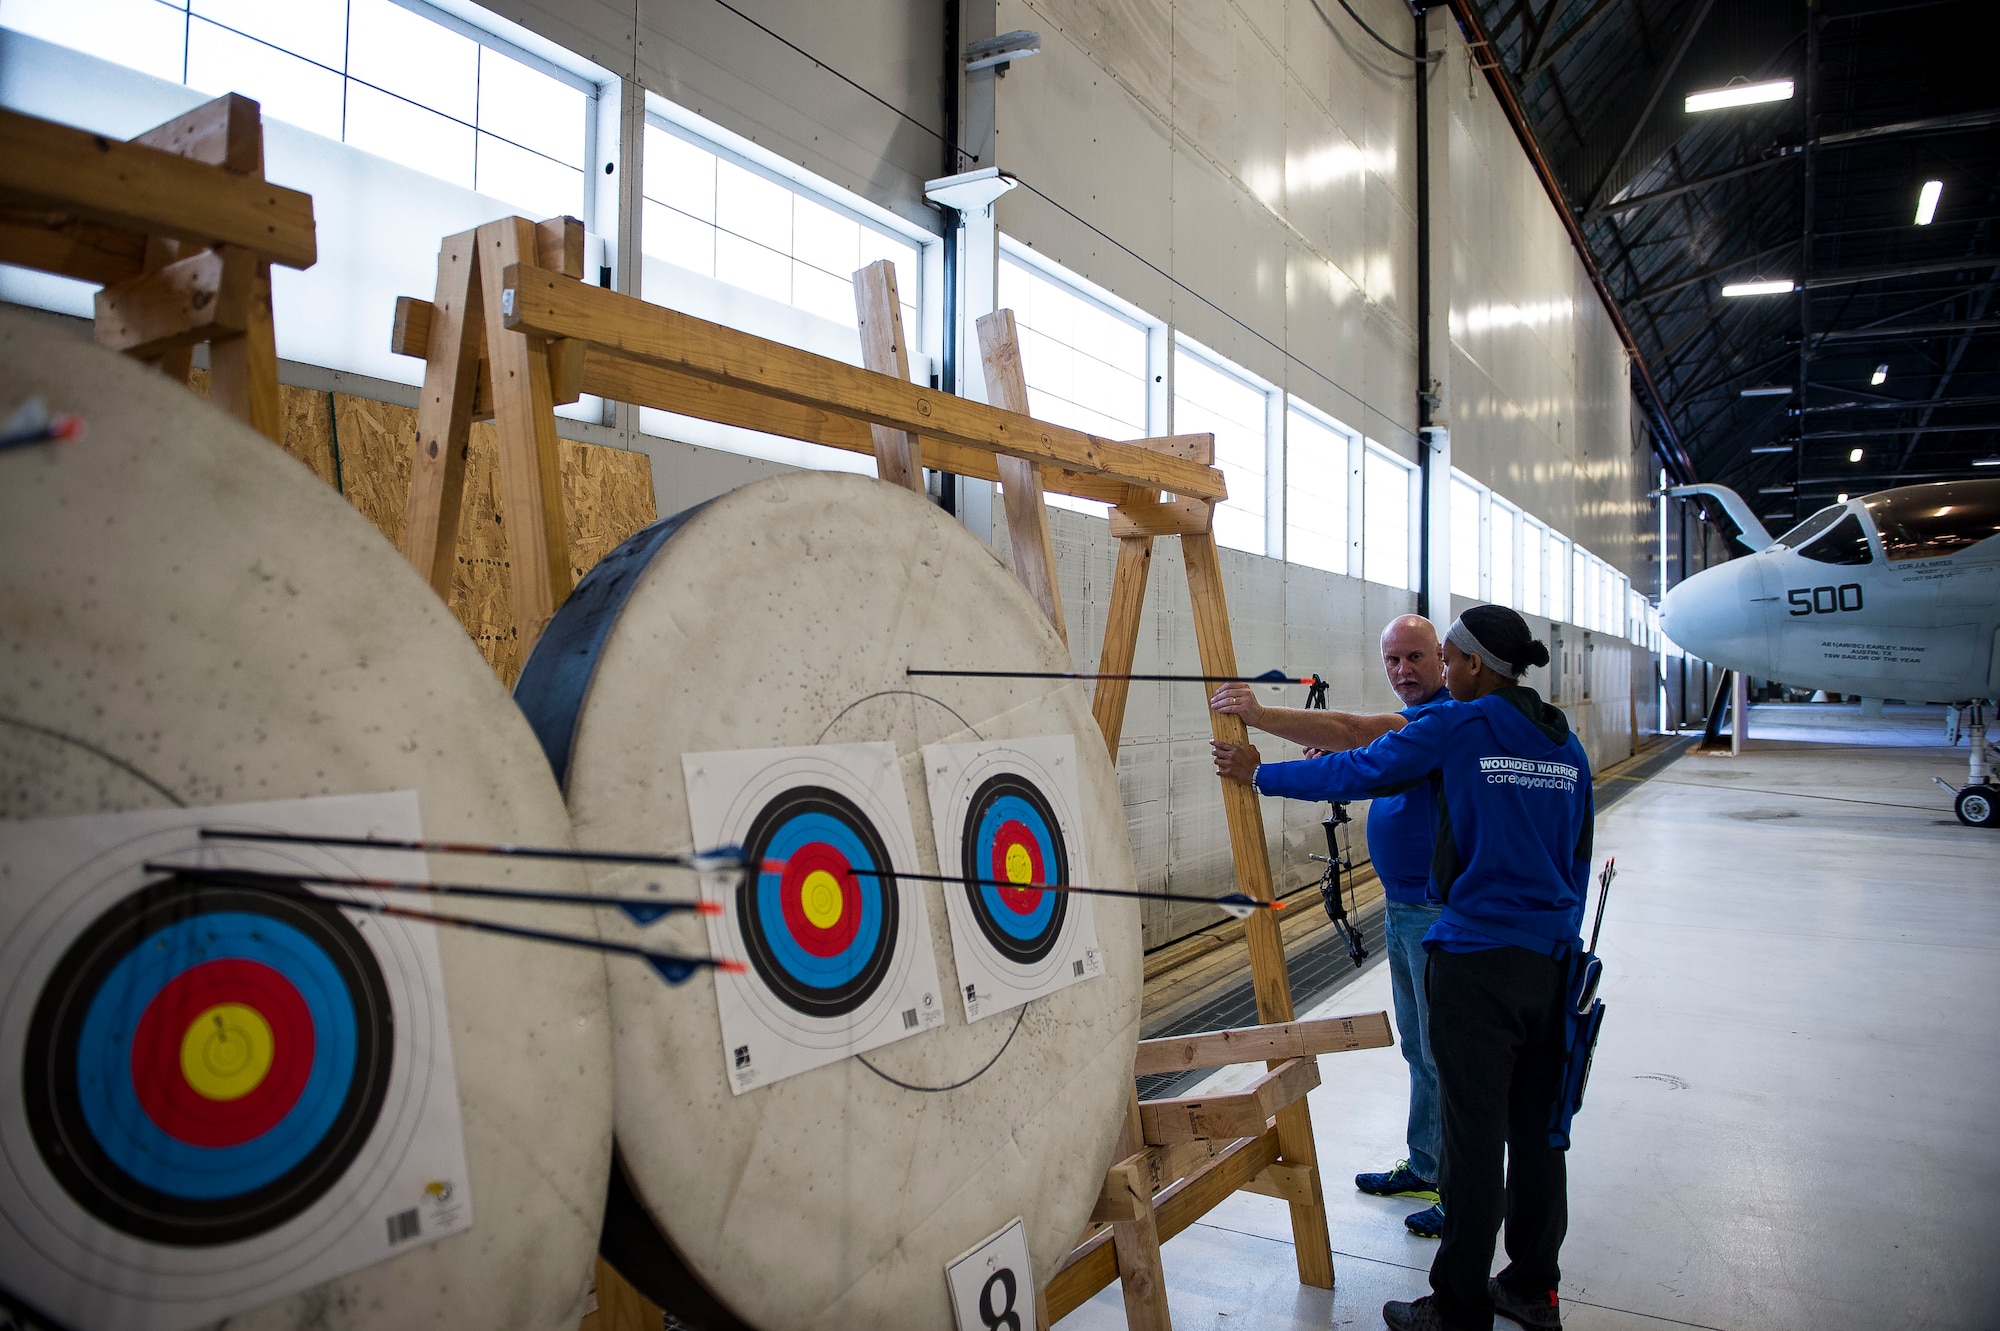 Jeff Matuszak, the Air Force Wounded Warrior Program archery head coach, gives pointers to Senior Airman Amanda Dotson, of the 779th Medical Support Squadron’s Airman Medical Transition Unit, during the Northeast Warrior CARE Event on Joint Base Andrews, Md., Nov. 18, 2016. The AFW2 regional CARE event provided a holistic opportunity for wounded warriors to enhance the four domains -- physical, mental, spiritual and social – of Comprehensive Airman Fitness. (U.S. Air Force photo/Staff Sgt. Christopher Gross)